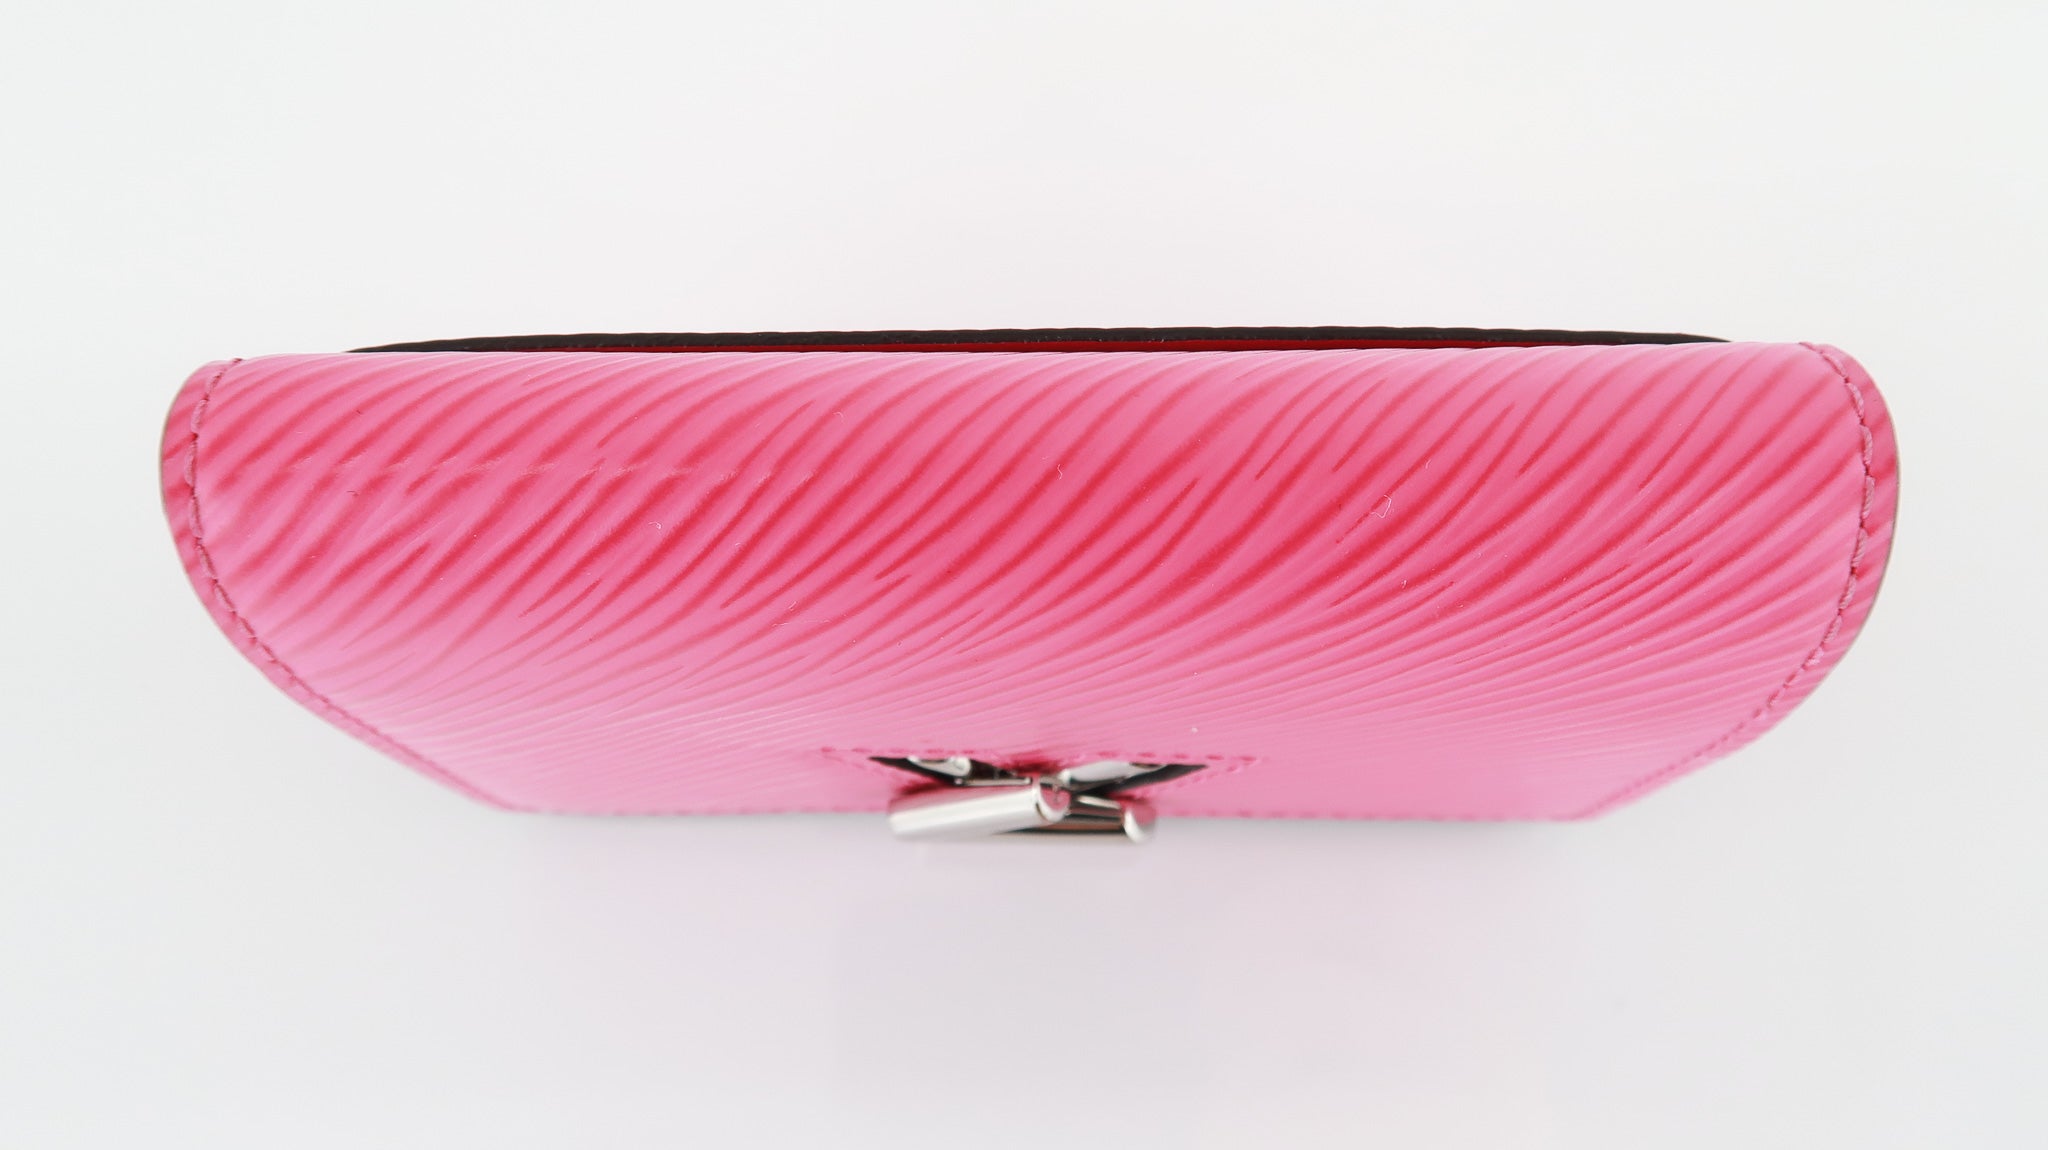 Twist Pink Epi Leather Compact Wallet